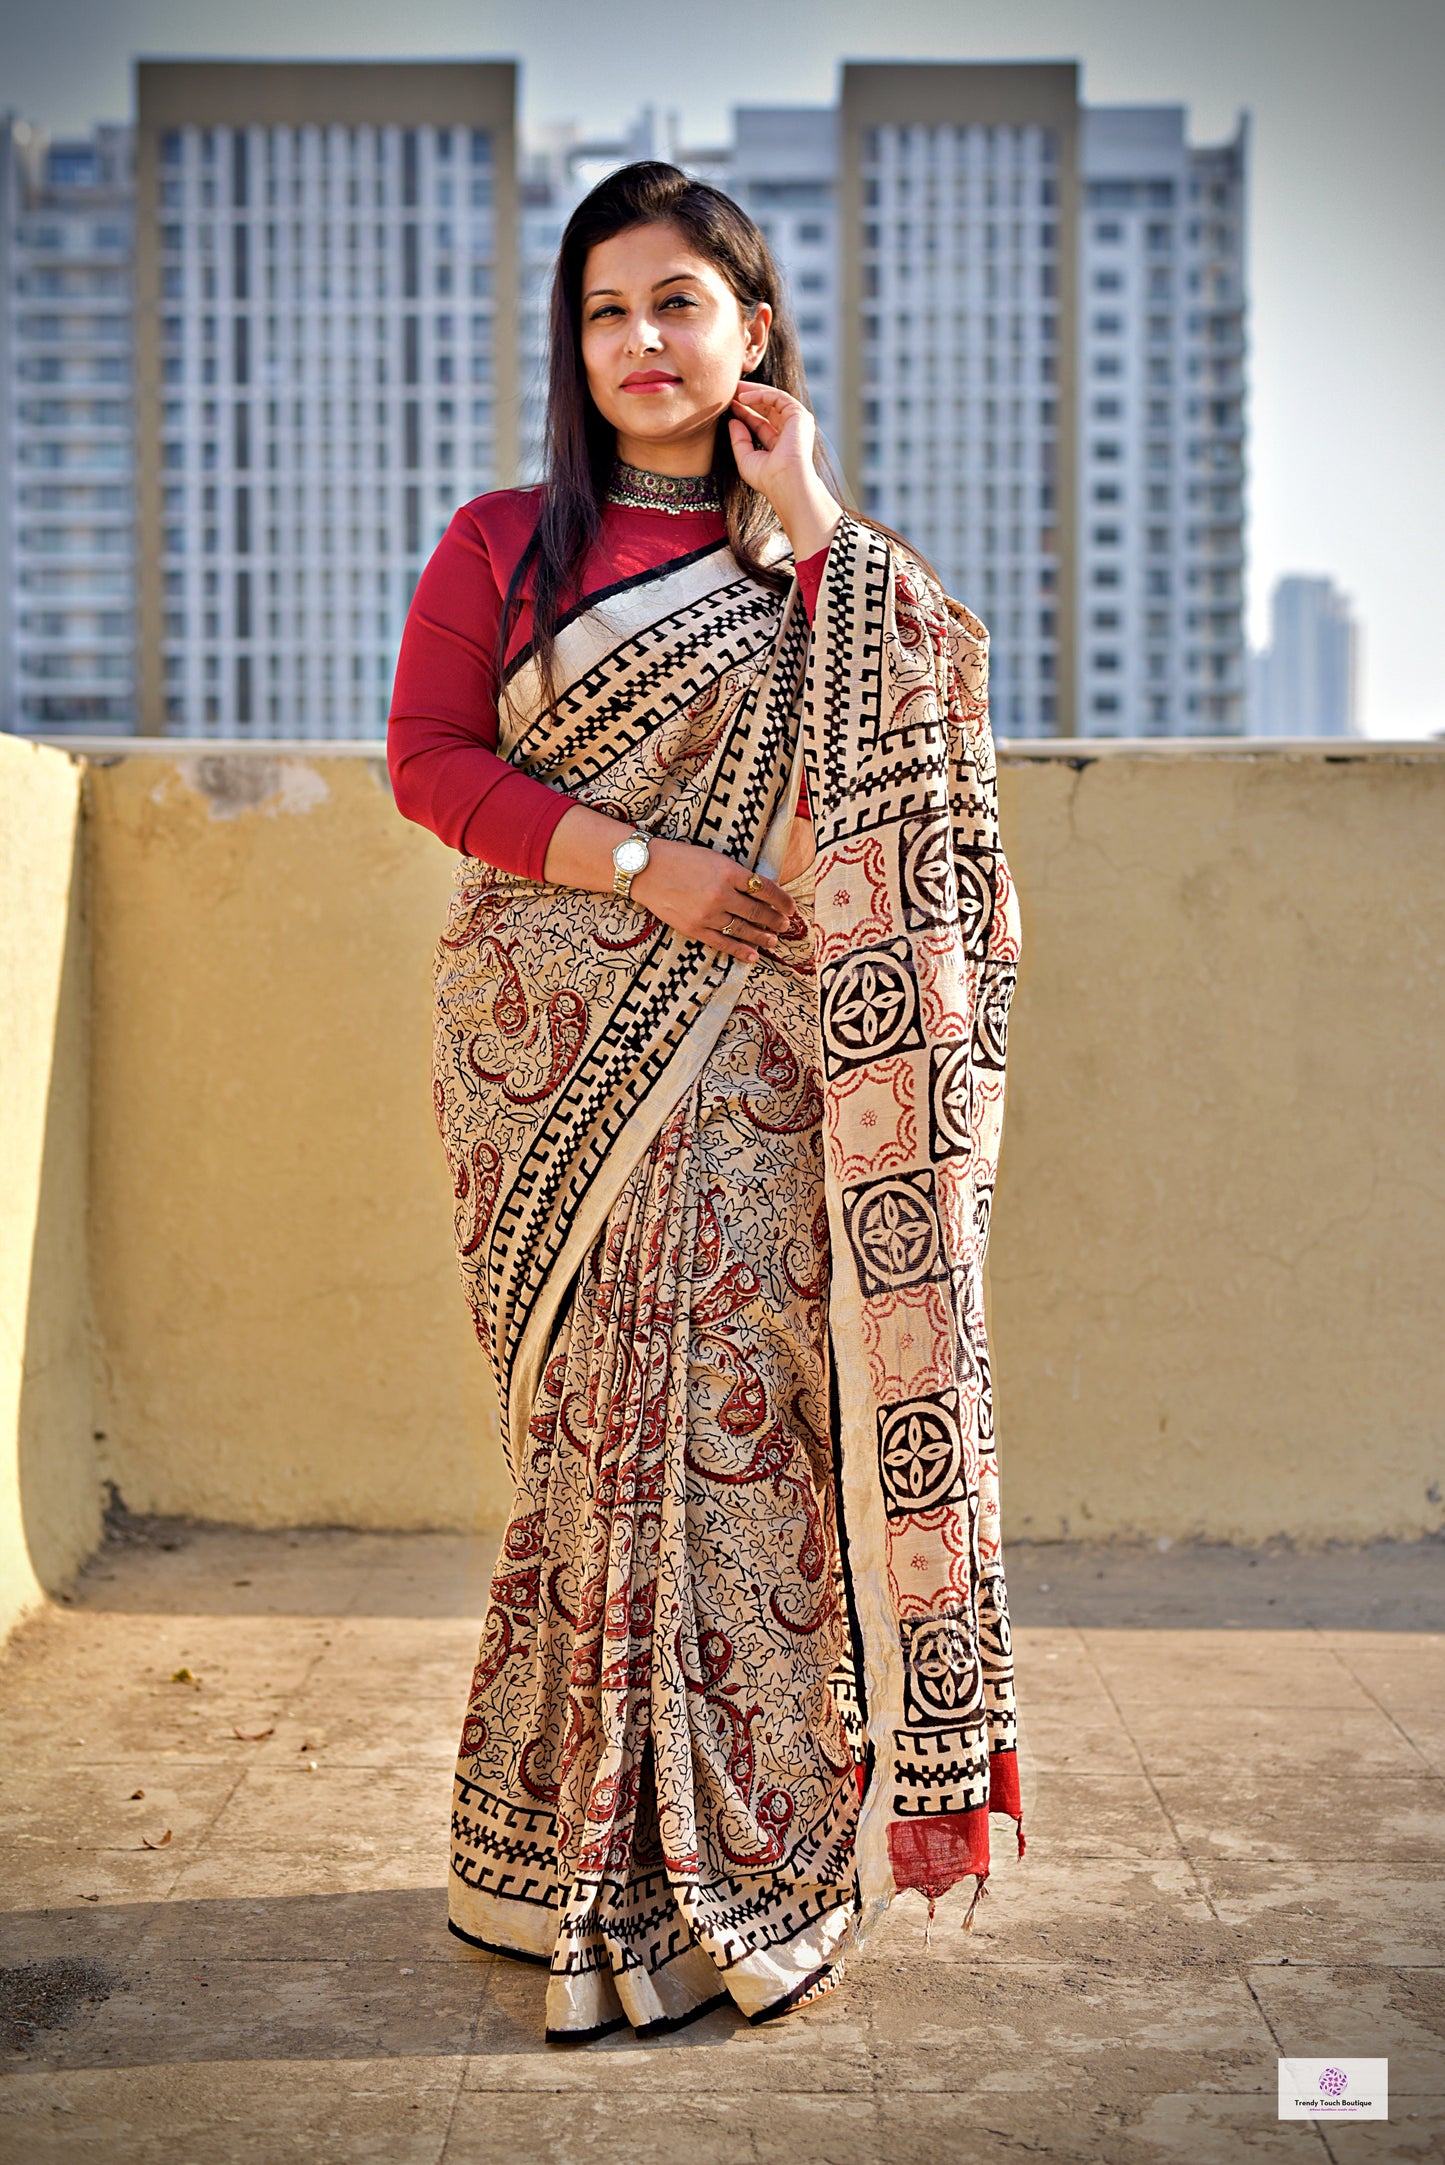 Beige Maroon Black Organic Handblock print in natural dye linen saree office and casual styling best price best summer fabric with blouse piece